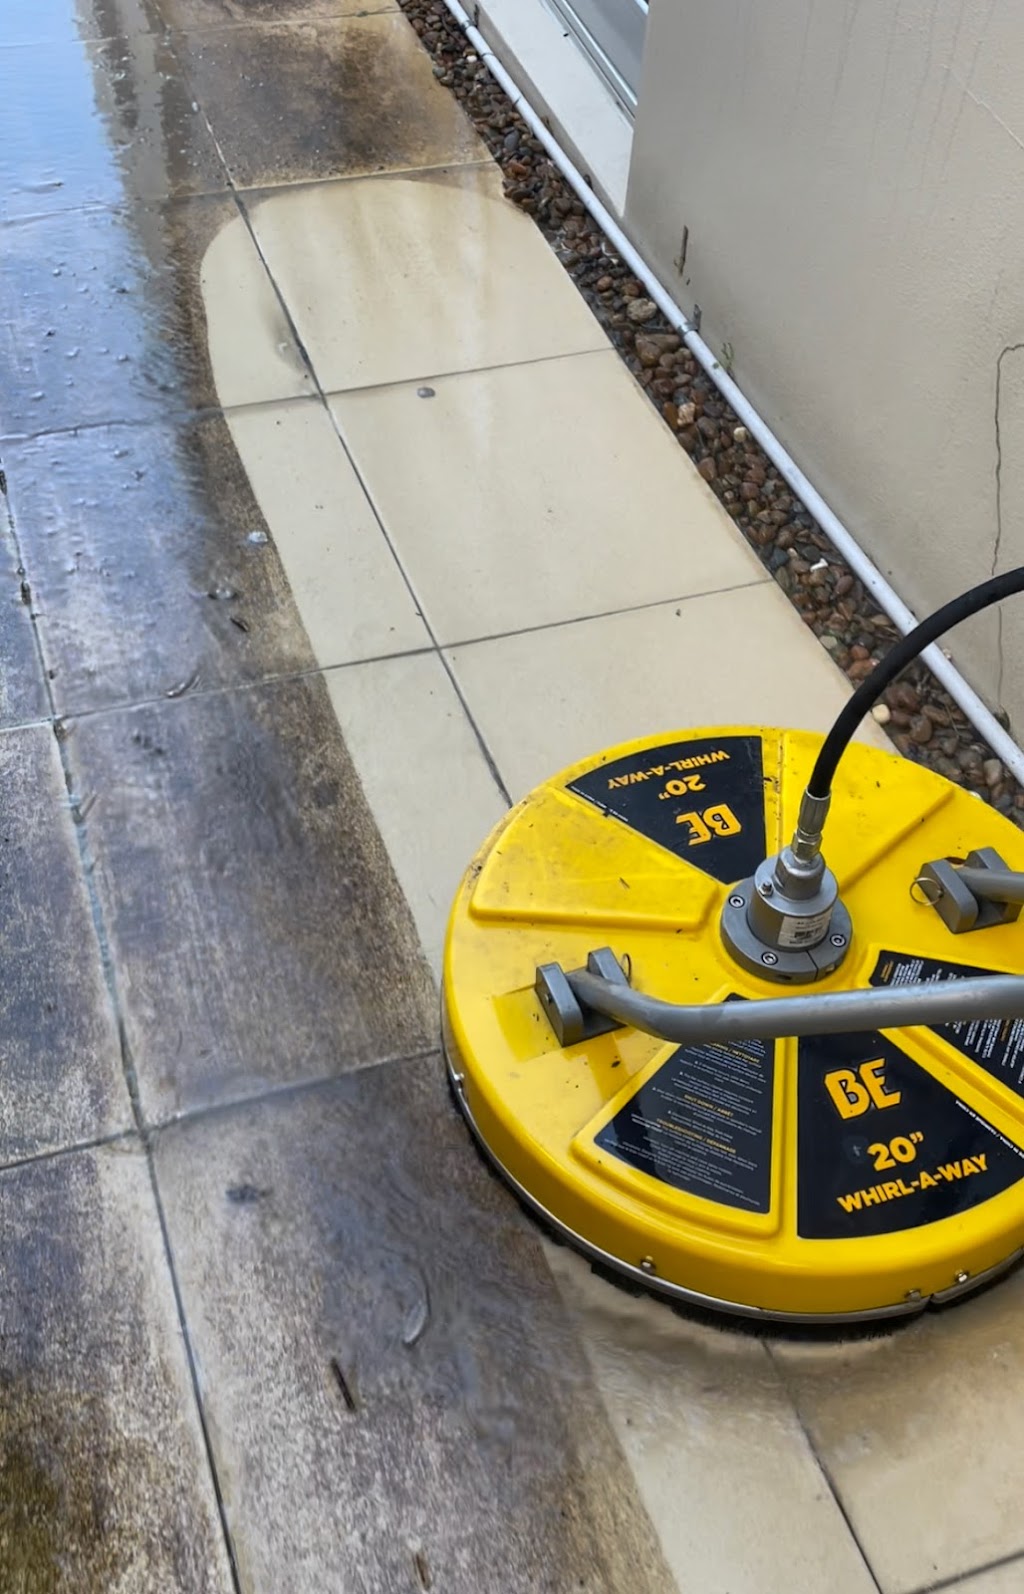 Mighty Mates Softwash & Pressure Washing |  | 1373A Pittwater Rd, Narrabeen NSW 2101, Australia | 0493206884 OR +61 493 206 884